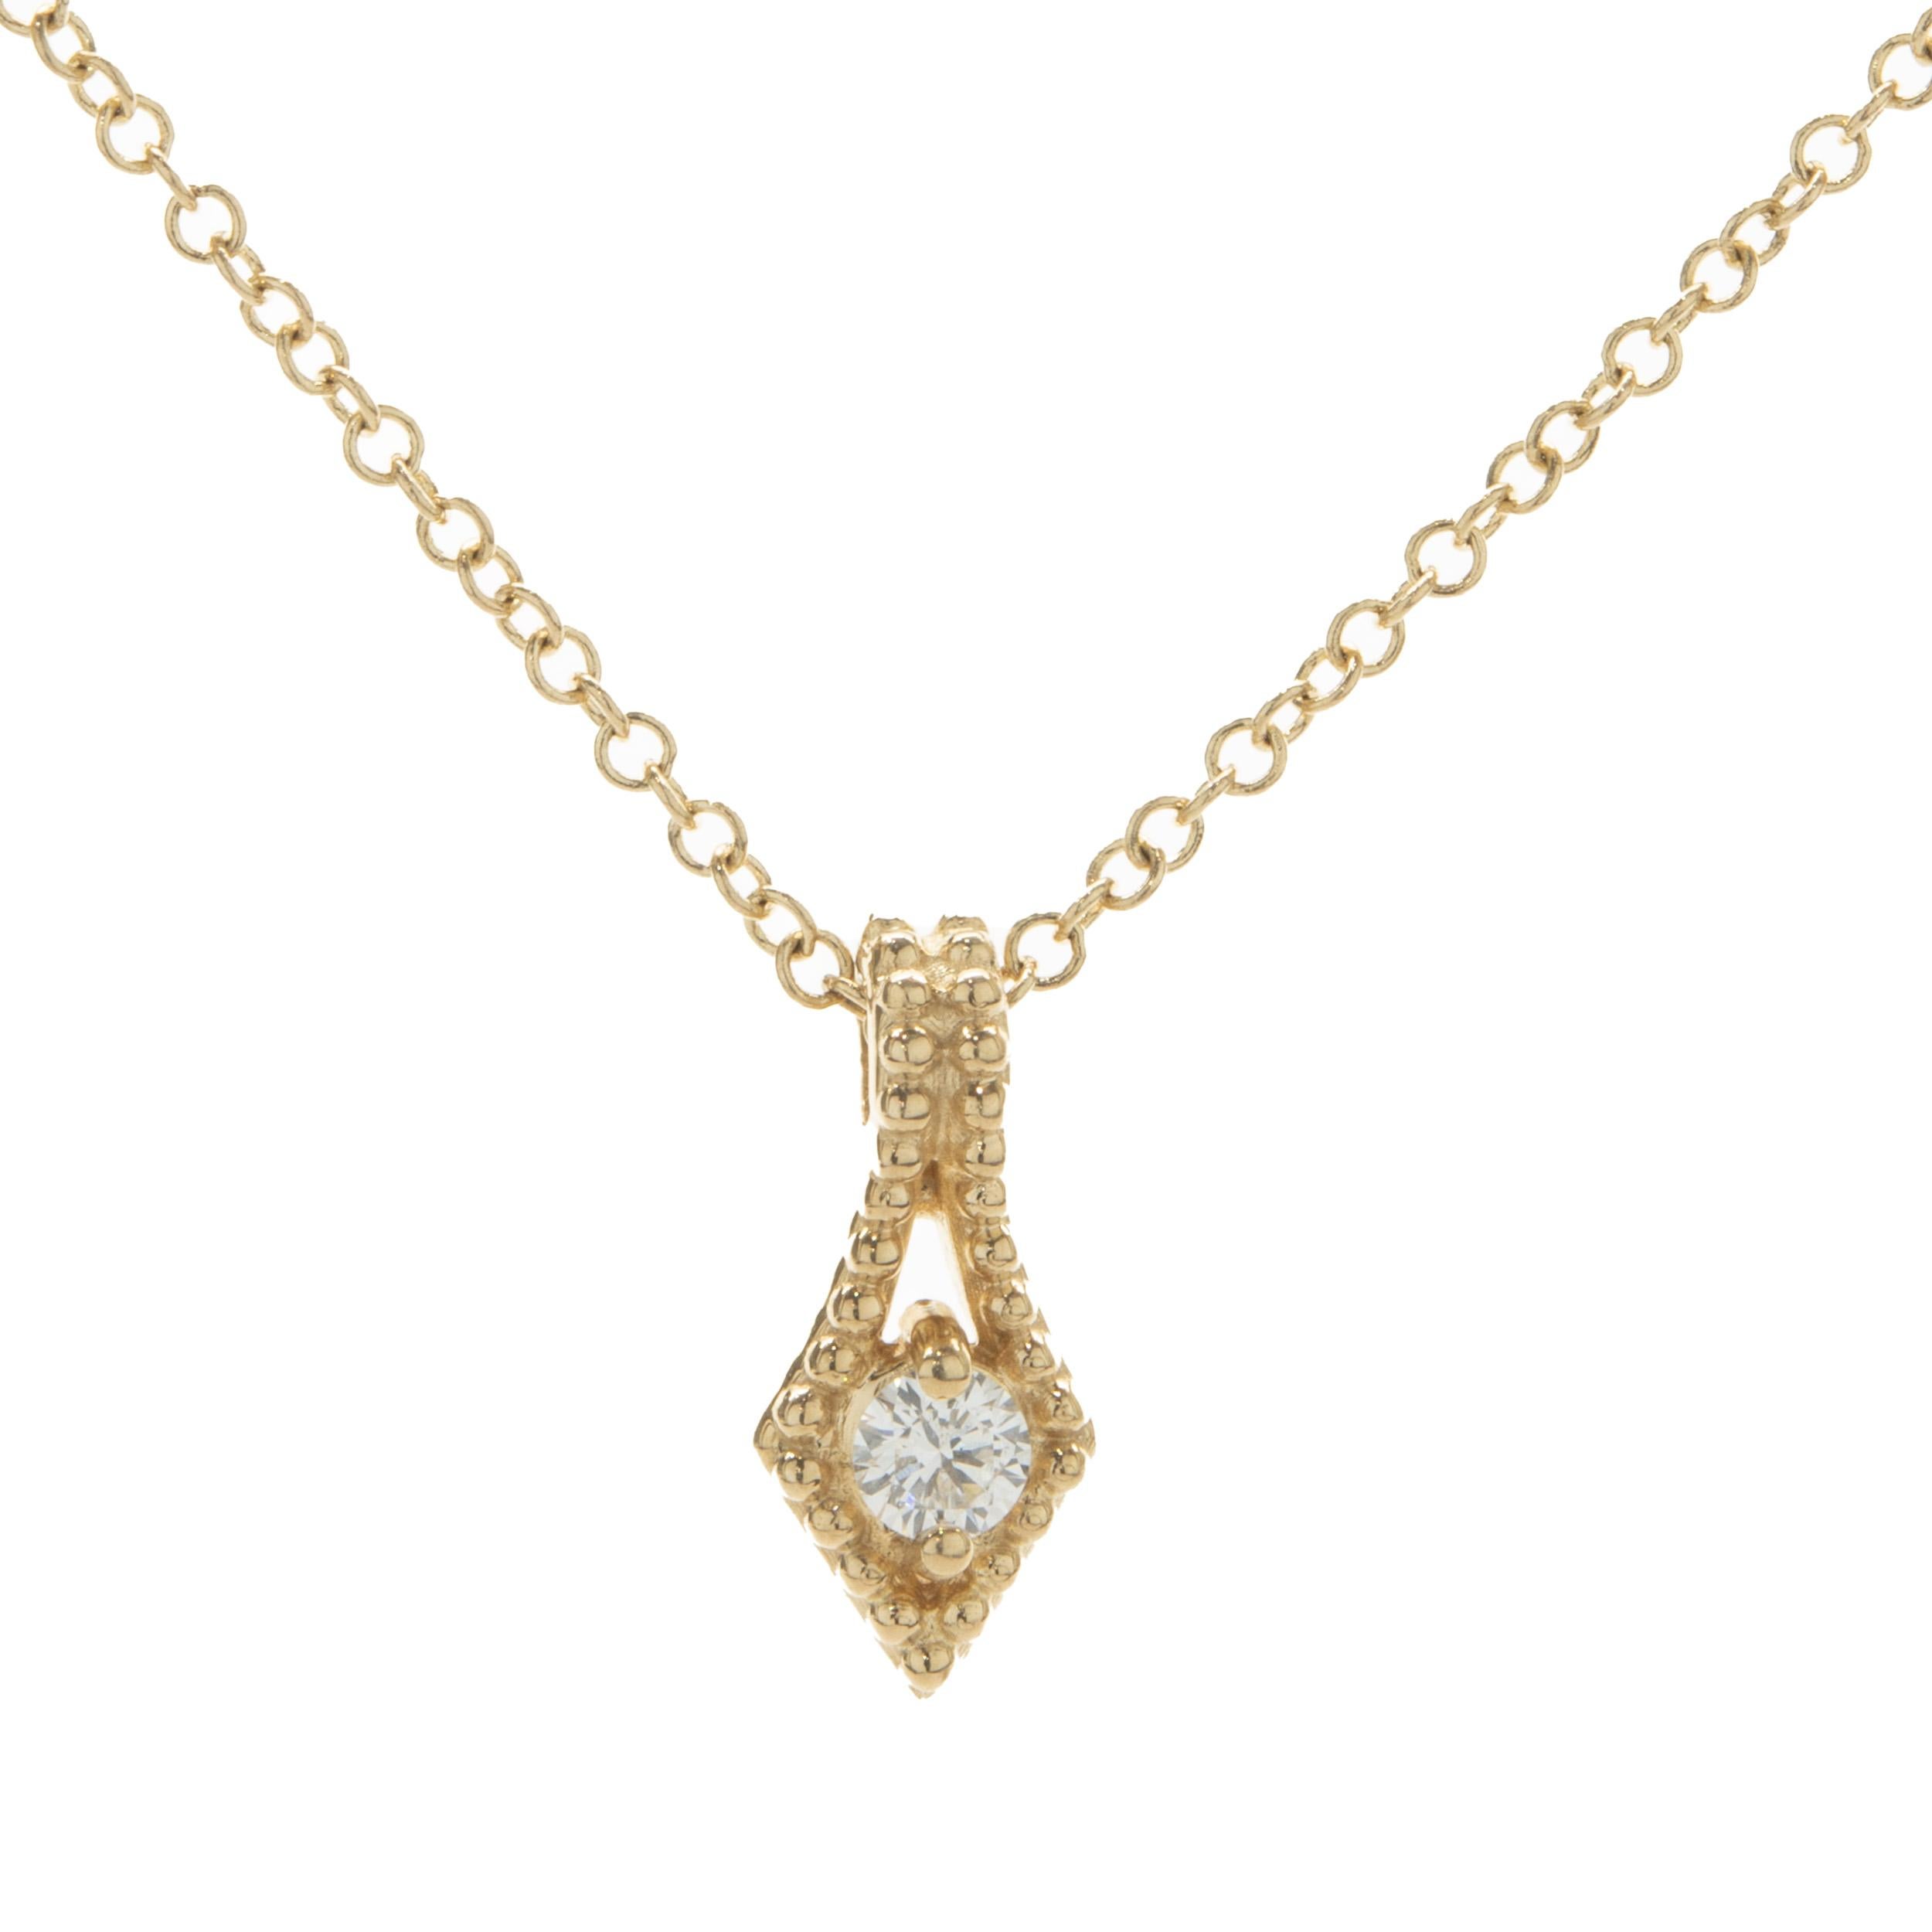 Designer: custom	
Material: 14K yellow gold
Diamonds: 13 round brilliant cut = 0.25cttw
Color: G
Clarity: SI1
Dimensions: necklace measures 18-inches in length 
Weight: 4.94 grams